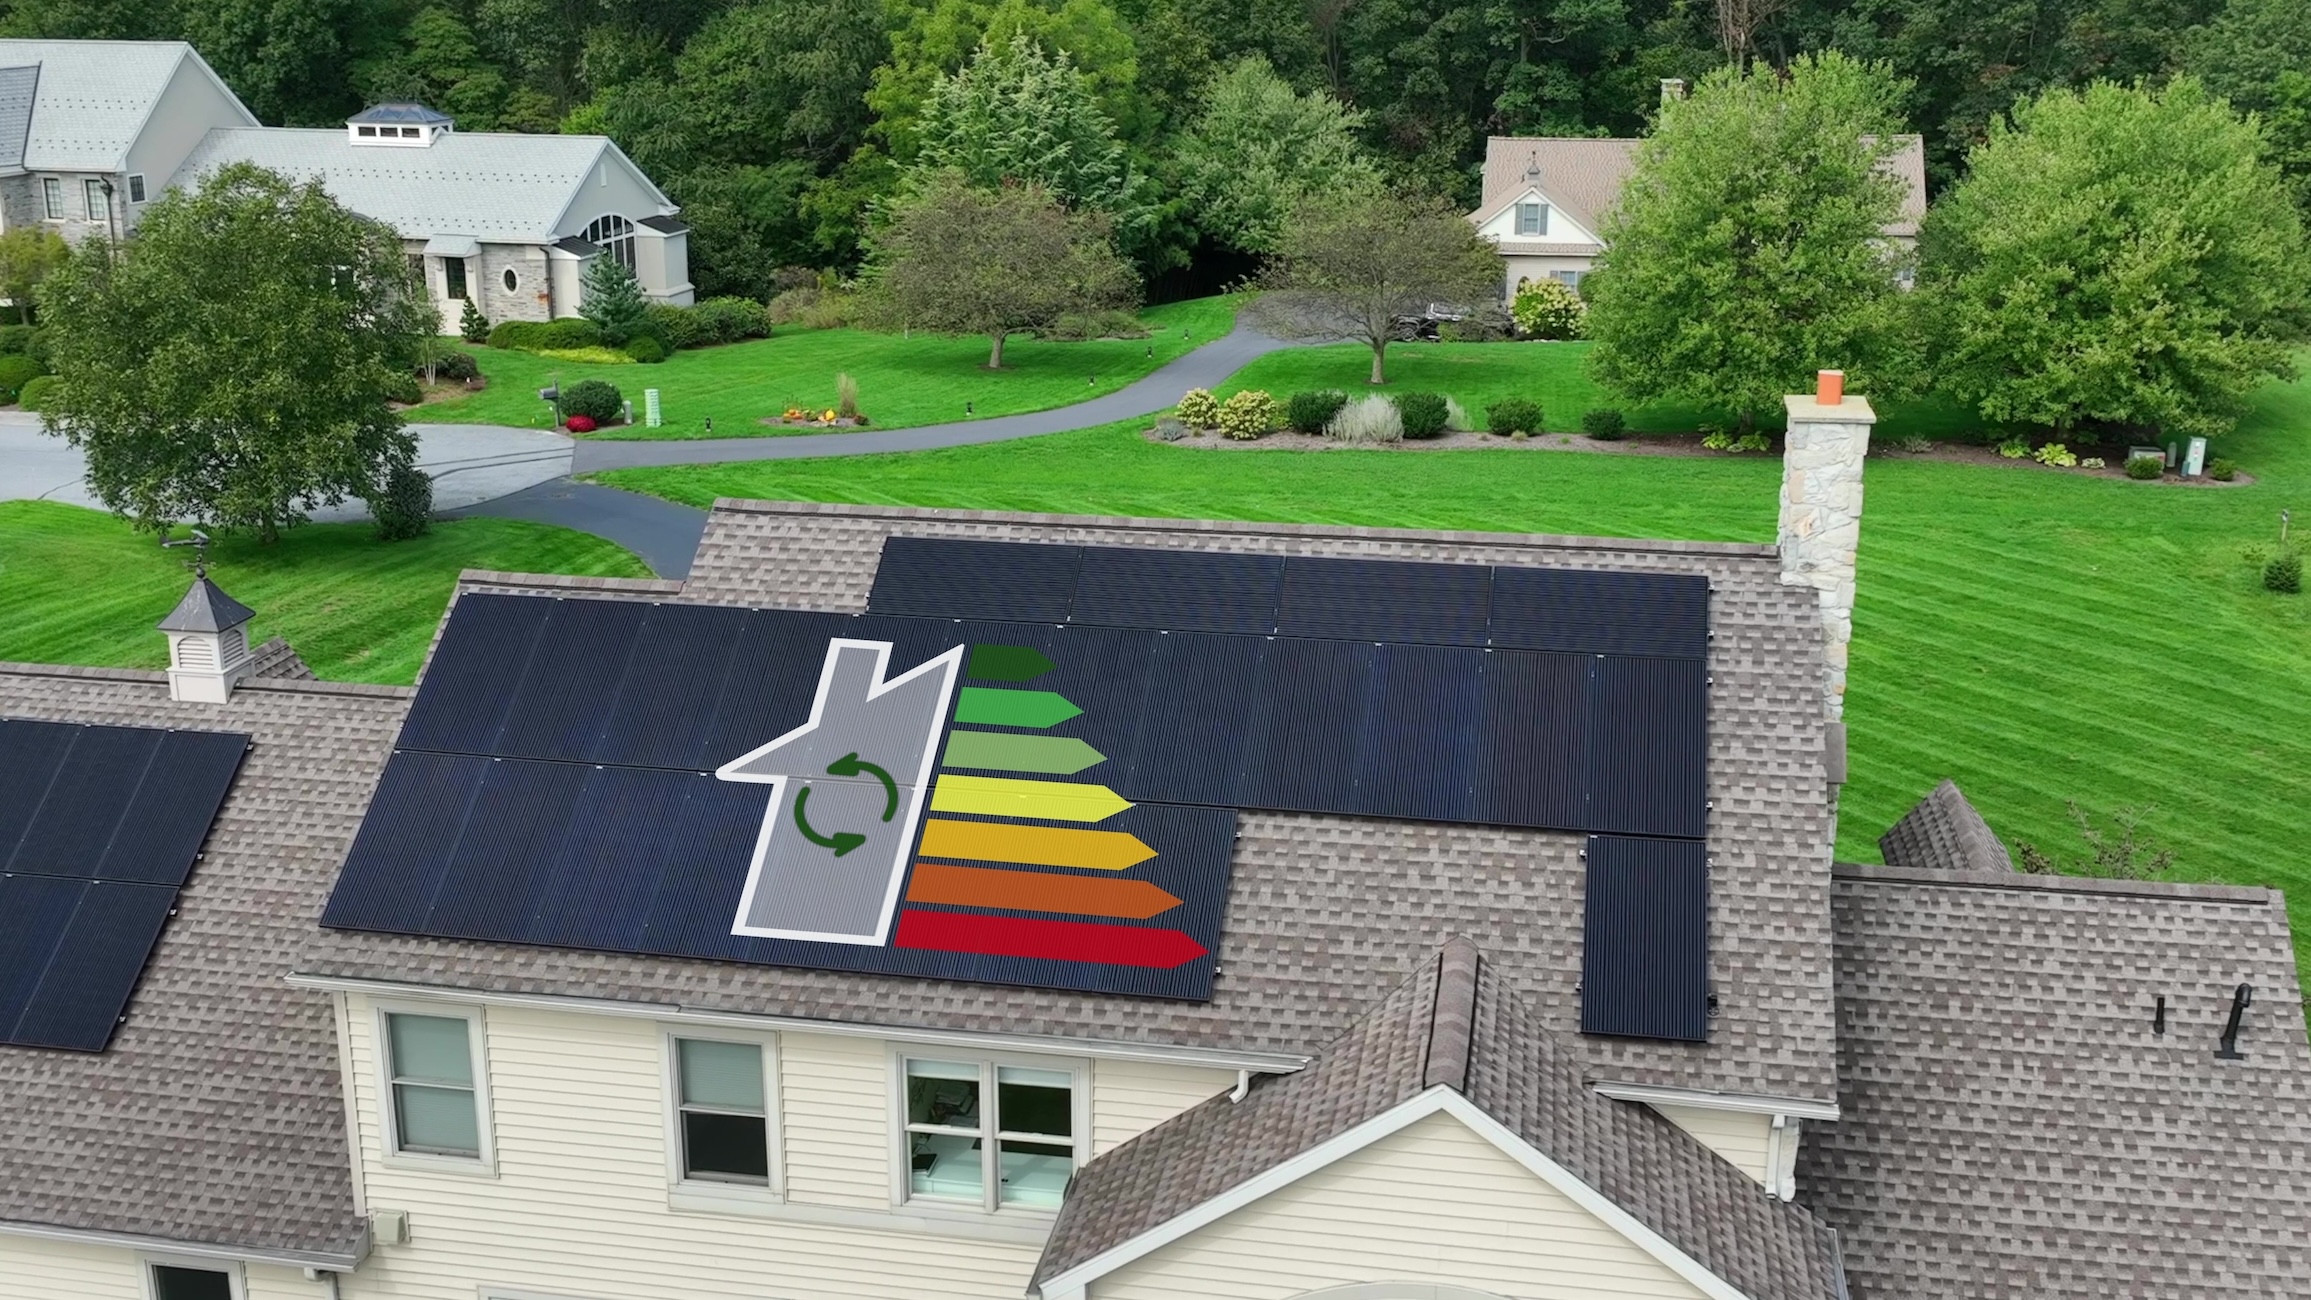 House with solar panels and energy rating graphic on roof